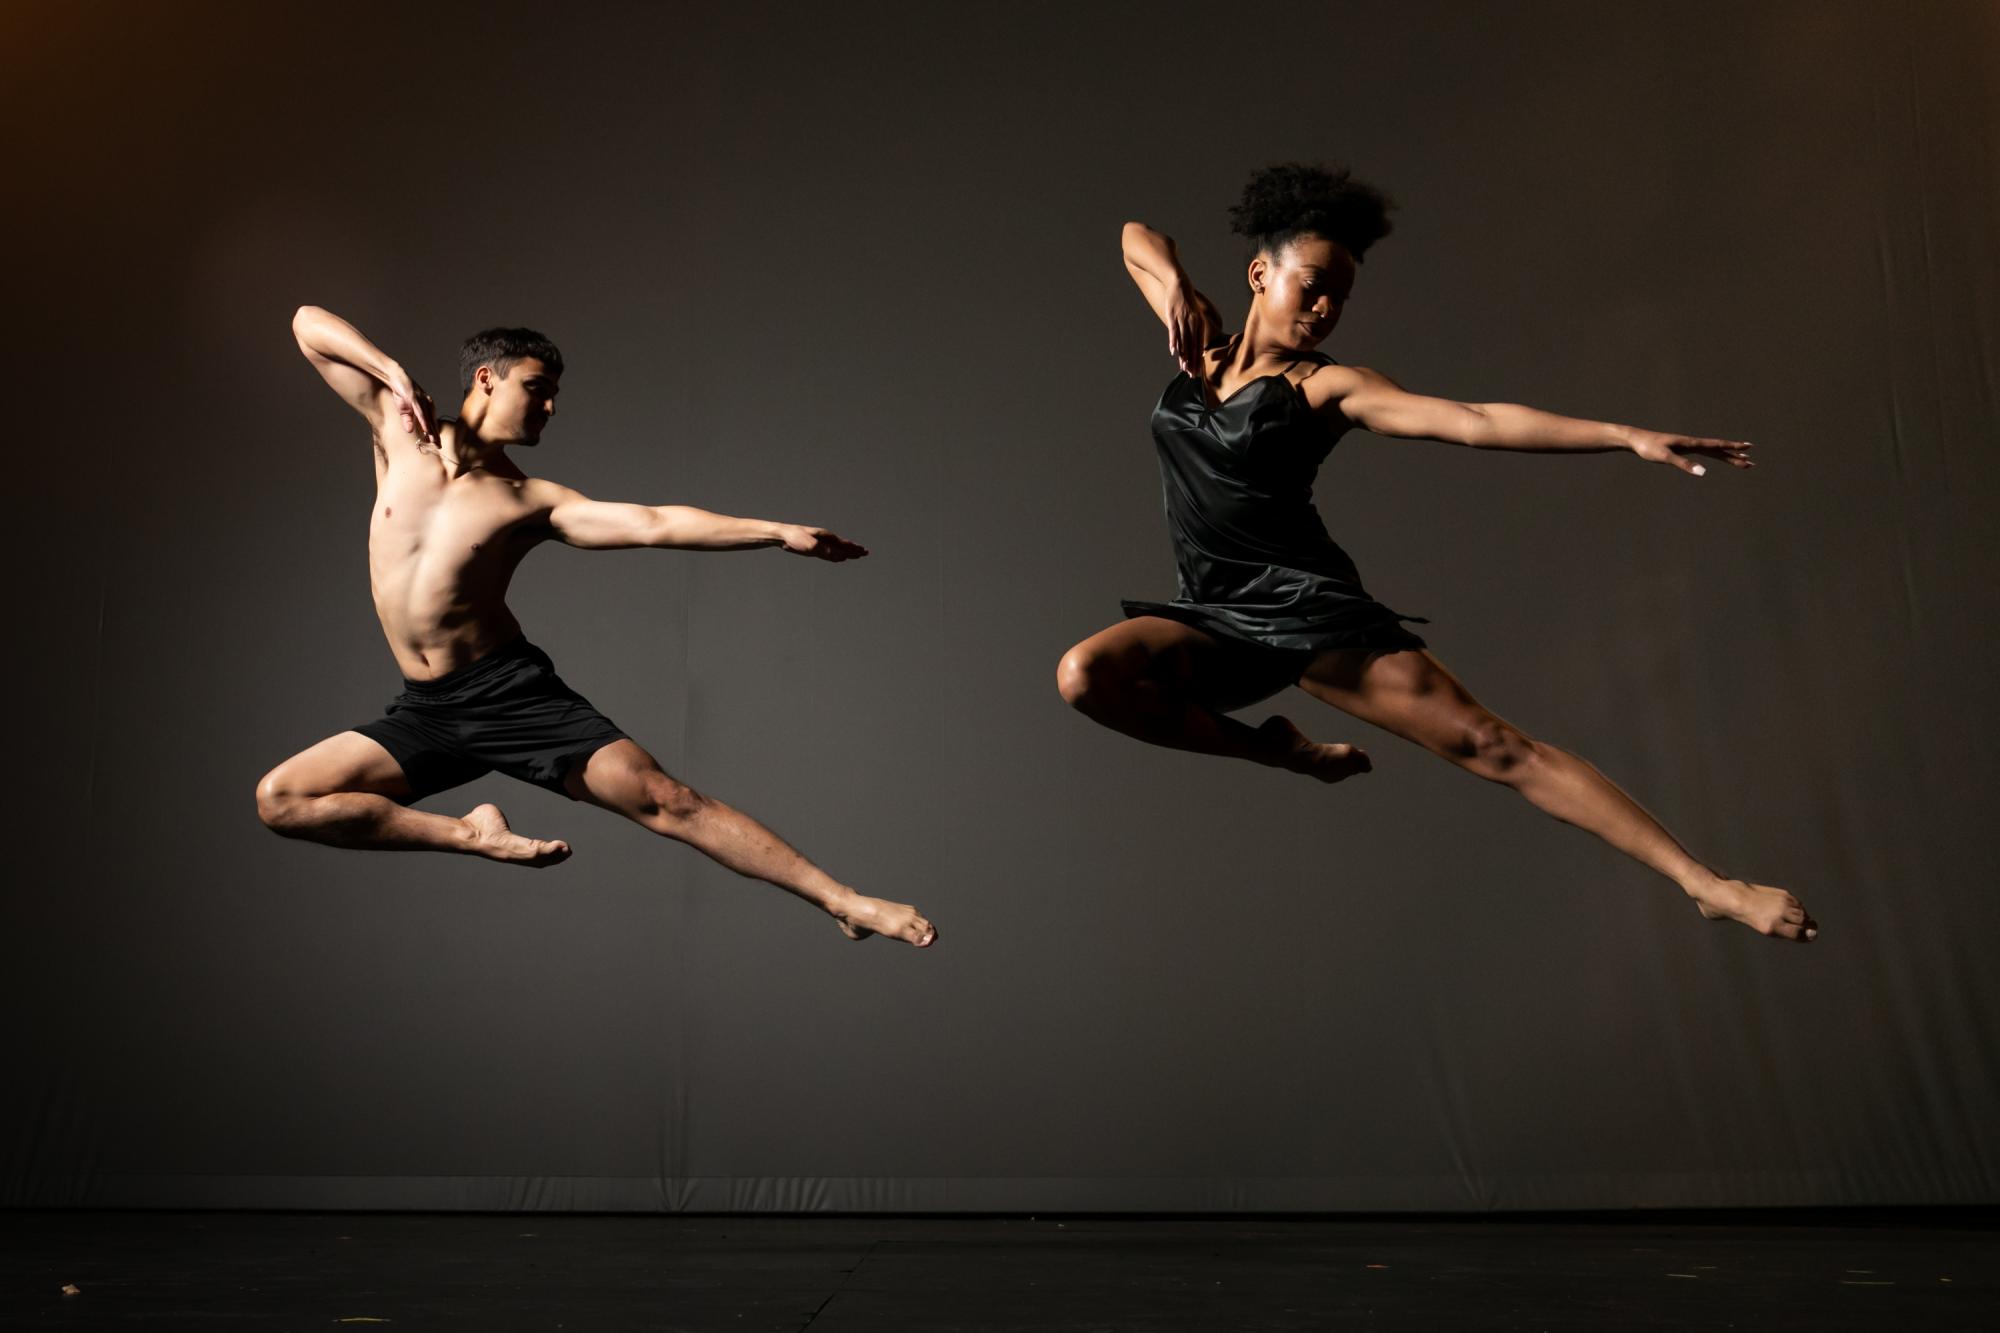 Two dancers caught mid-jump with their left legs and arms extended and their right arms and legs bent